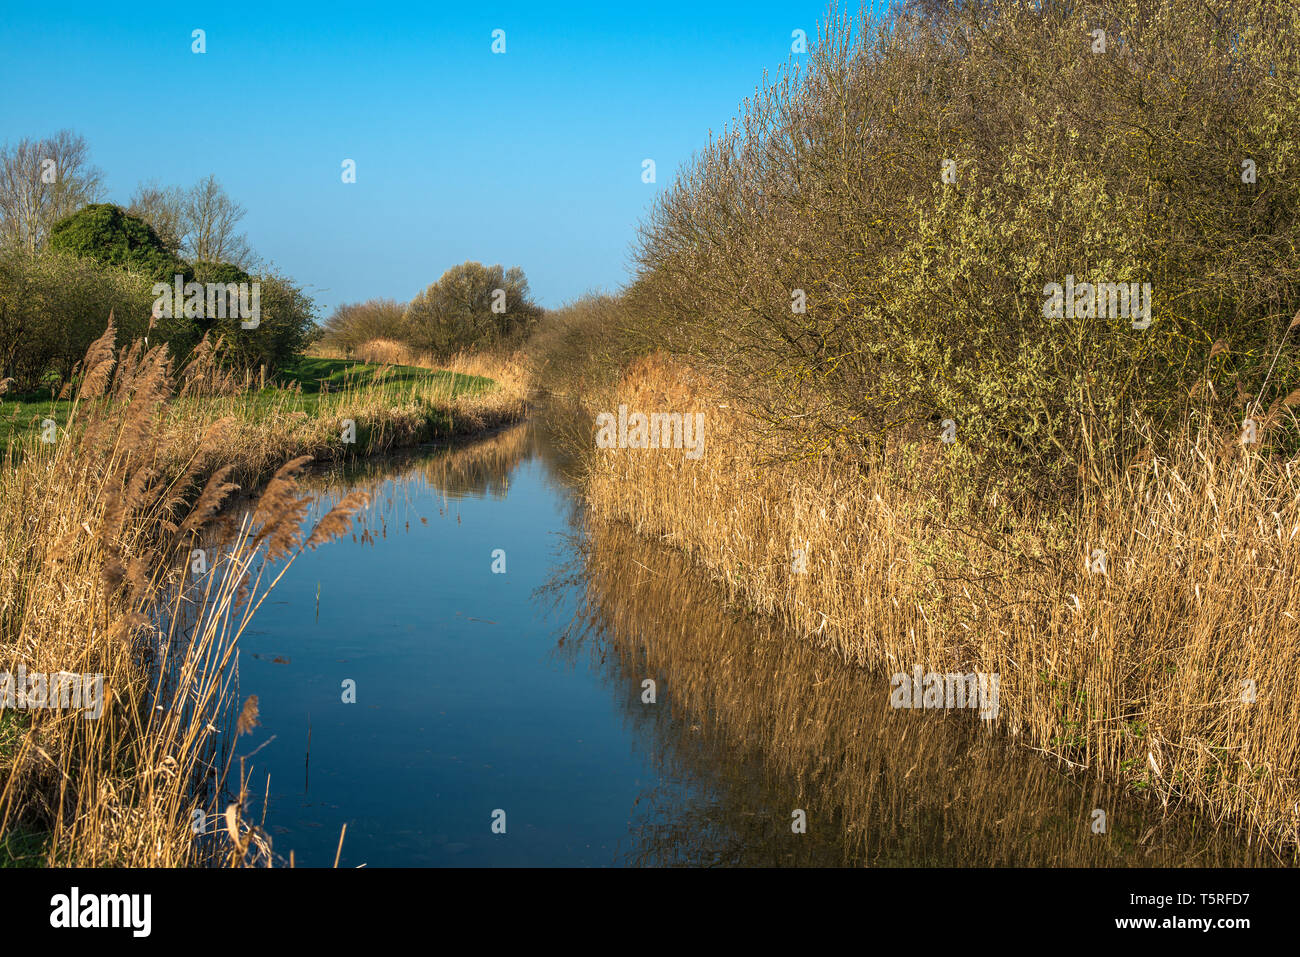 Waterway and reed beds at Wicken Fen Nature Reserve in Cambridgeshire, East Anglia, England, UK. Stock Photo